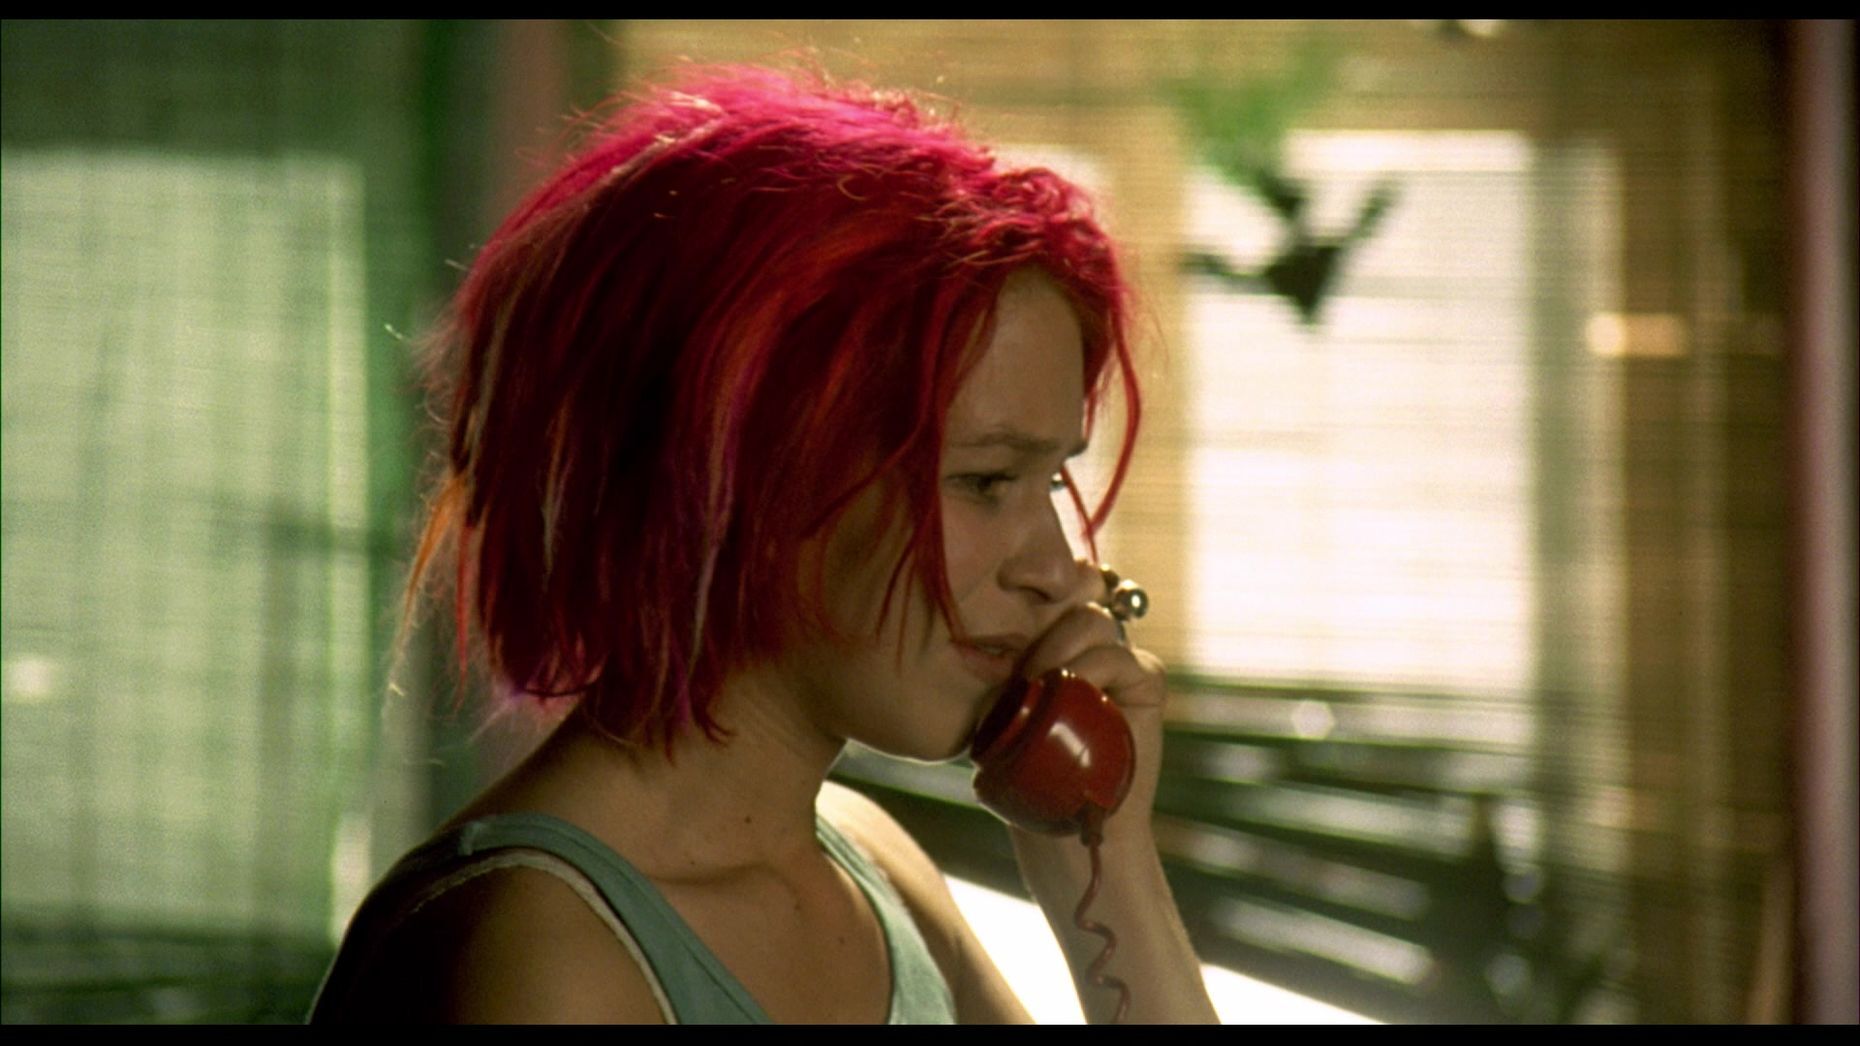 <p>If you ever took a university film class, you probably watched the German classic <em>Run Lola Run</em> starring Franka Potente. Directed by Tom Tykwer, who went on to co-direct <em>Cloud Atlas</em>, the film itself is a sprint: <a href="https://www.rogerebert.com/reviews/run-lola-run-1999">Lola races</a> through Berlin, on a 20-minute clock to get 100,000 Deutschmarks and save her boyfriend’s life—but when she’s shot dead, the events begin all over again. This experimental thriller received critical acclaim and had a tremendous impact on other filmmakers. Today, it maintains a <a href="https://www.rottentomatoes.com/m/run_lola_run">90% Fresh audience score</a> on Rotten Tomatoes.</p>